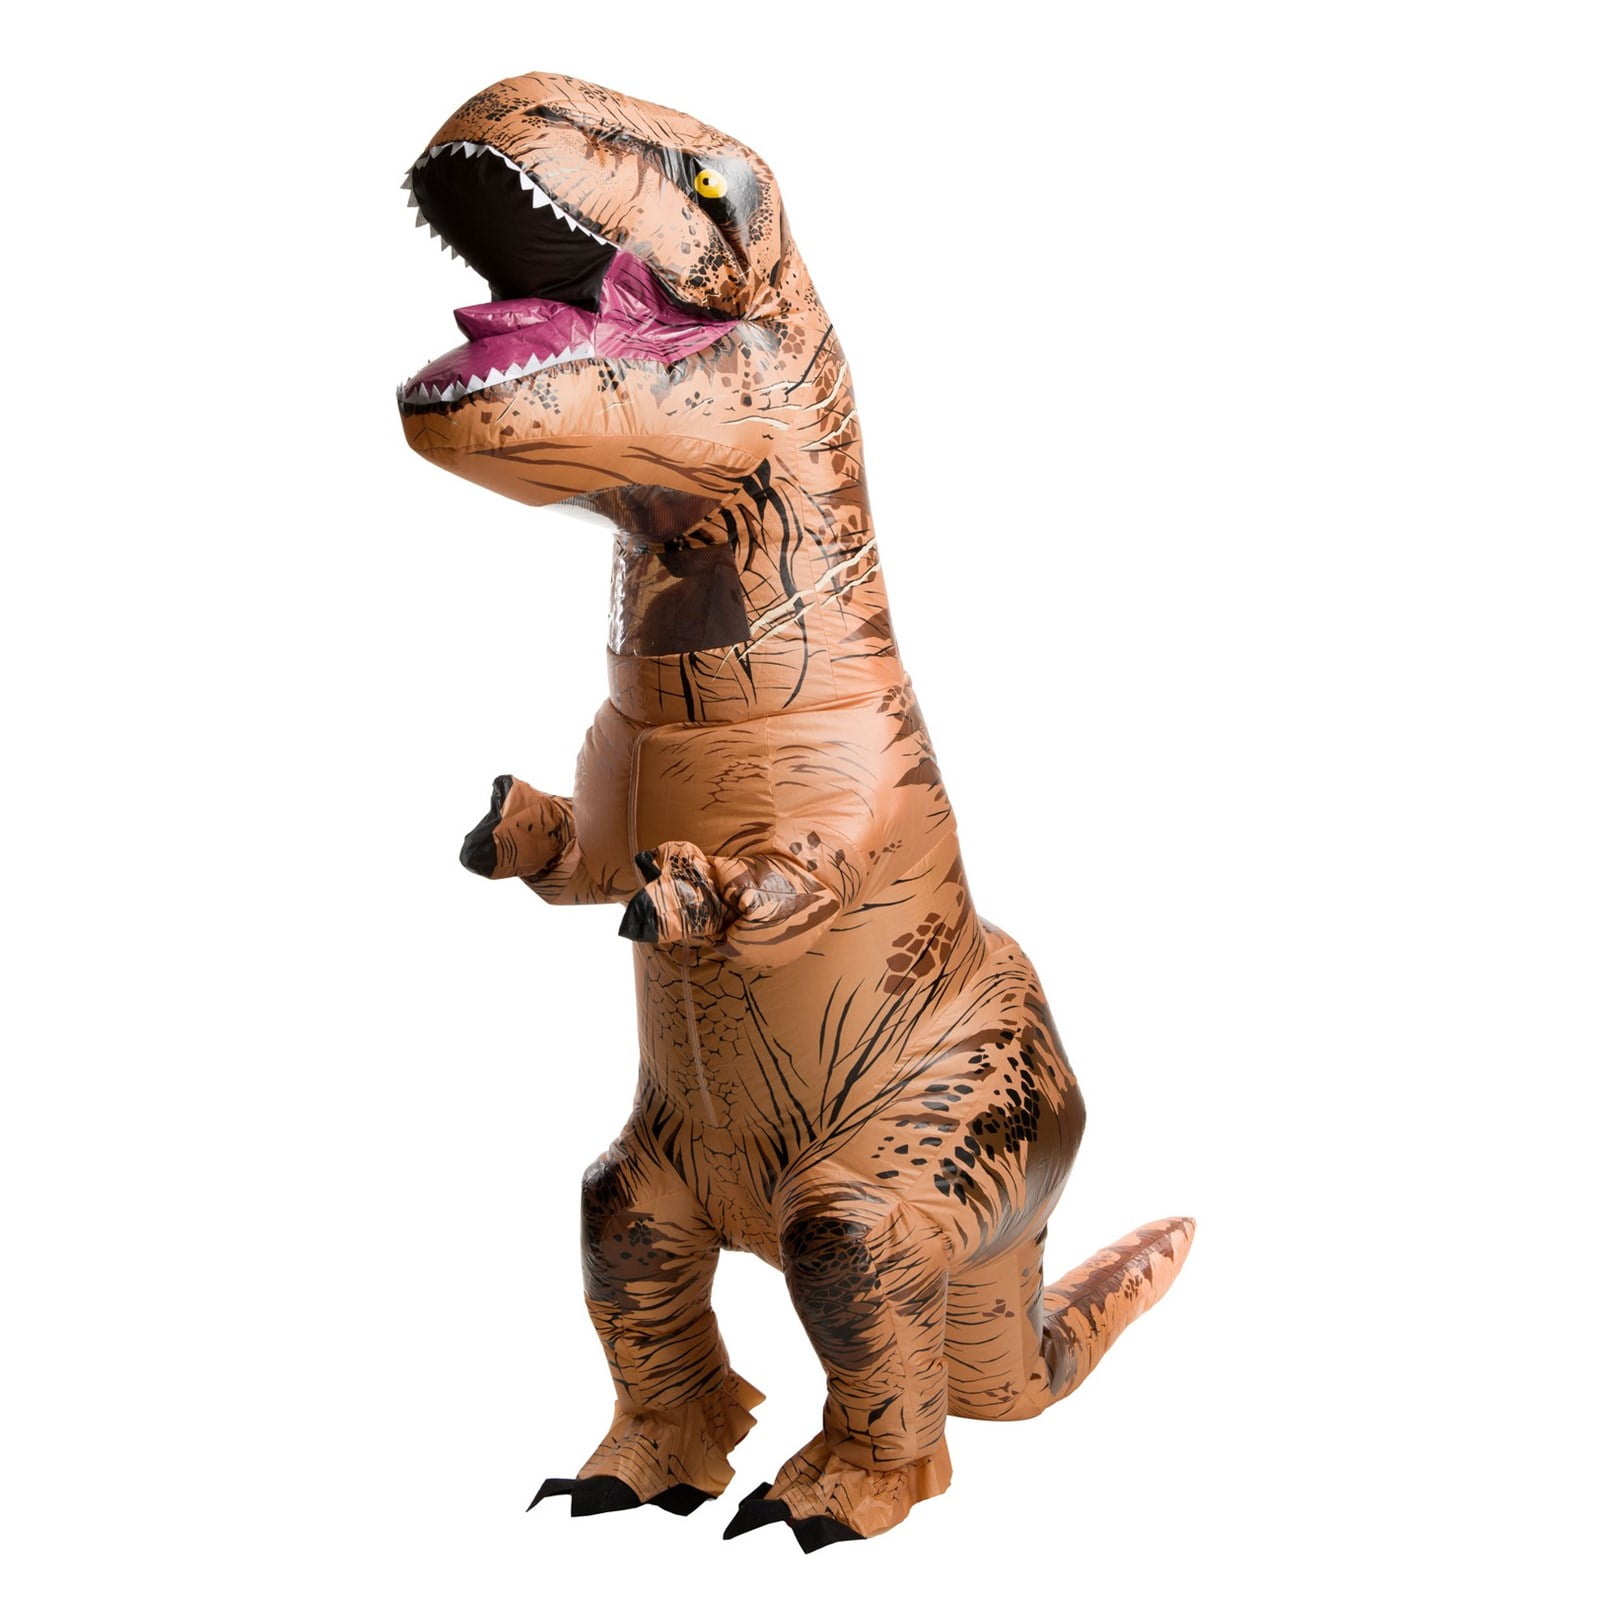 Details about   Adults Kid Inflatable T-REX Costume Dinosaur Halloween Blow up Outfits UHG